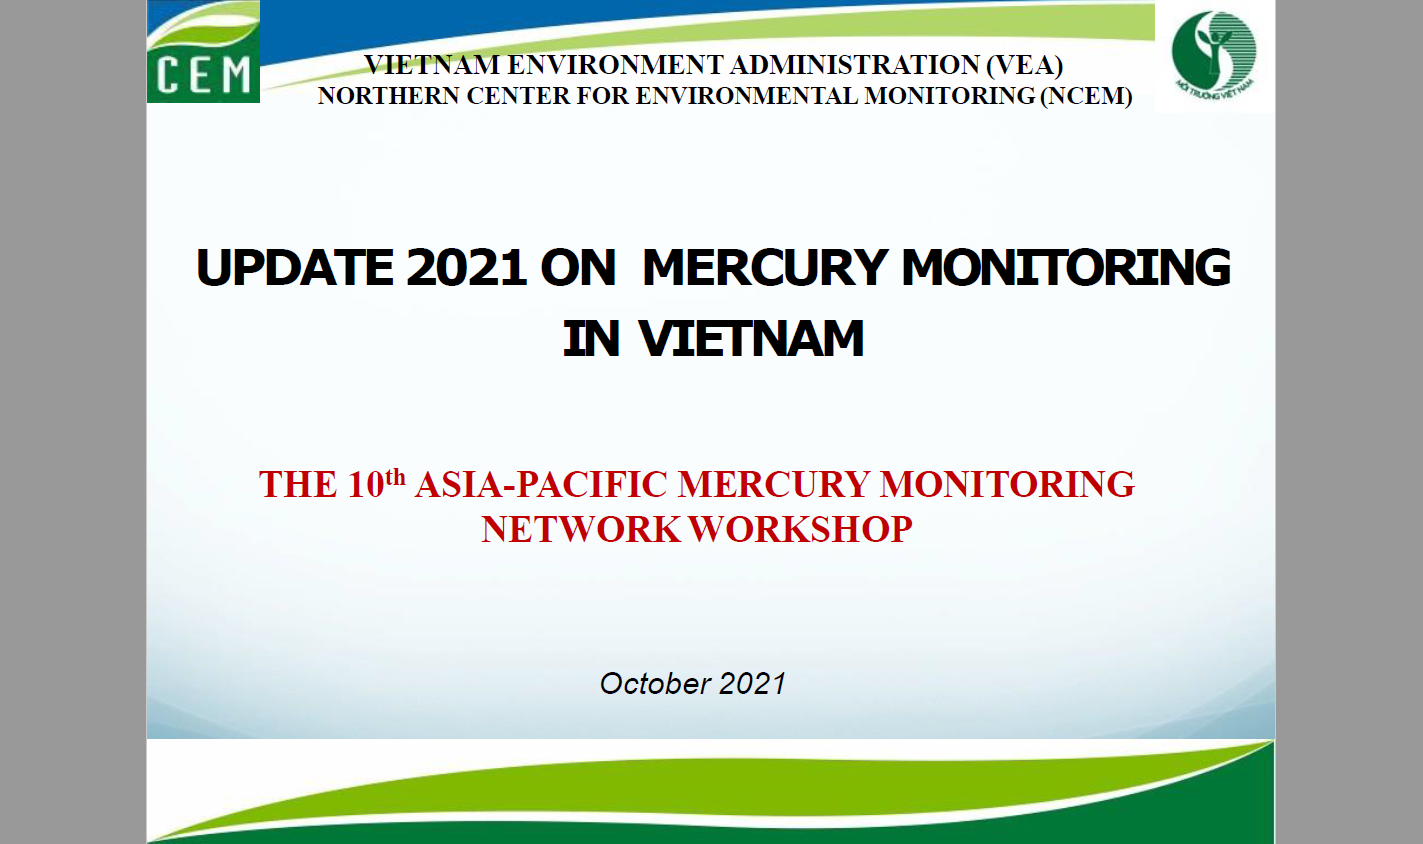 First page of UPDATE 2021 ON MERCURY MONITORING IN VIETNAM